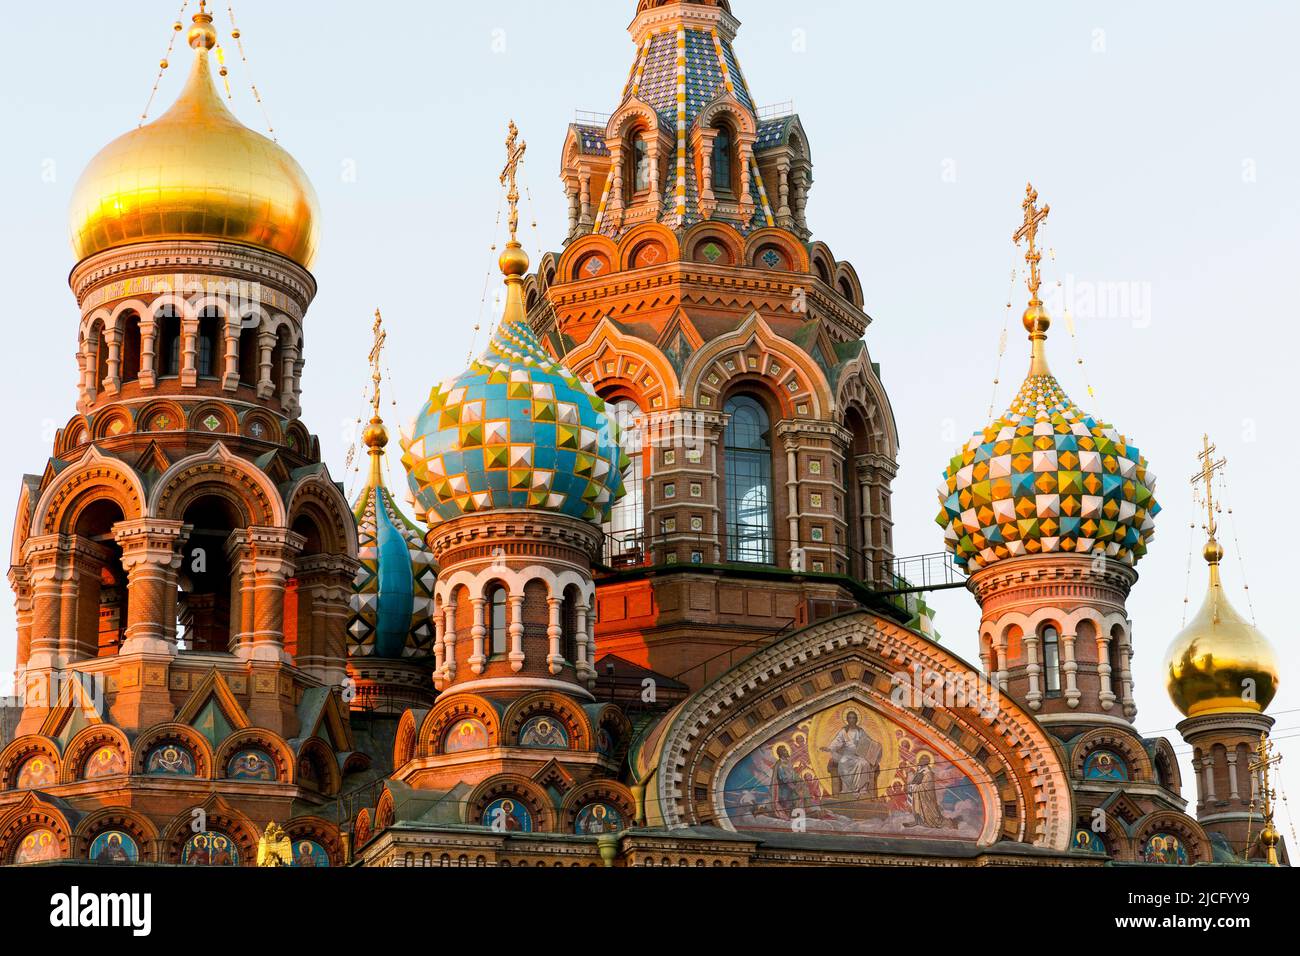 Exterior Domes of the Church of the Savior on Spilled Blood, Saint Petersburg, Russia Stock Photo